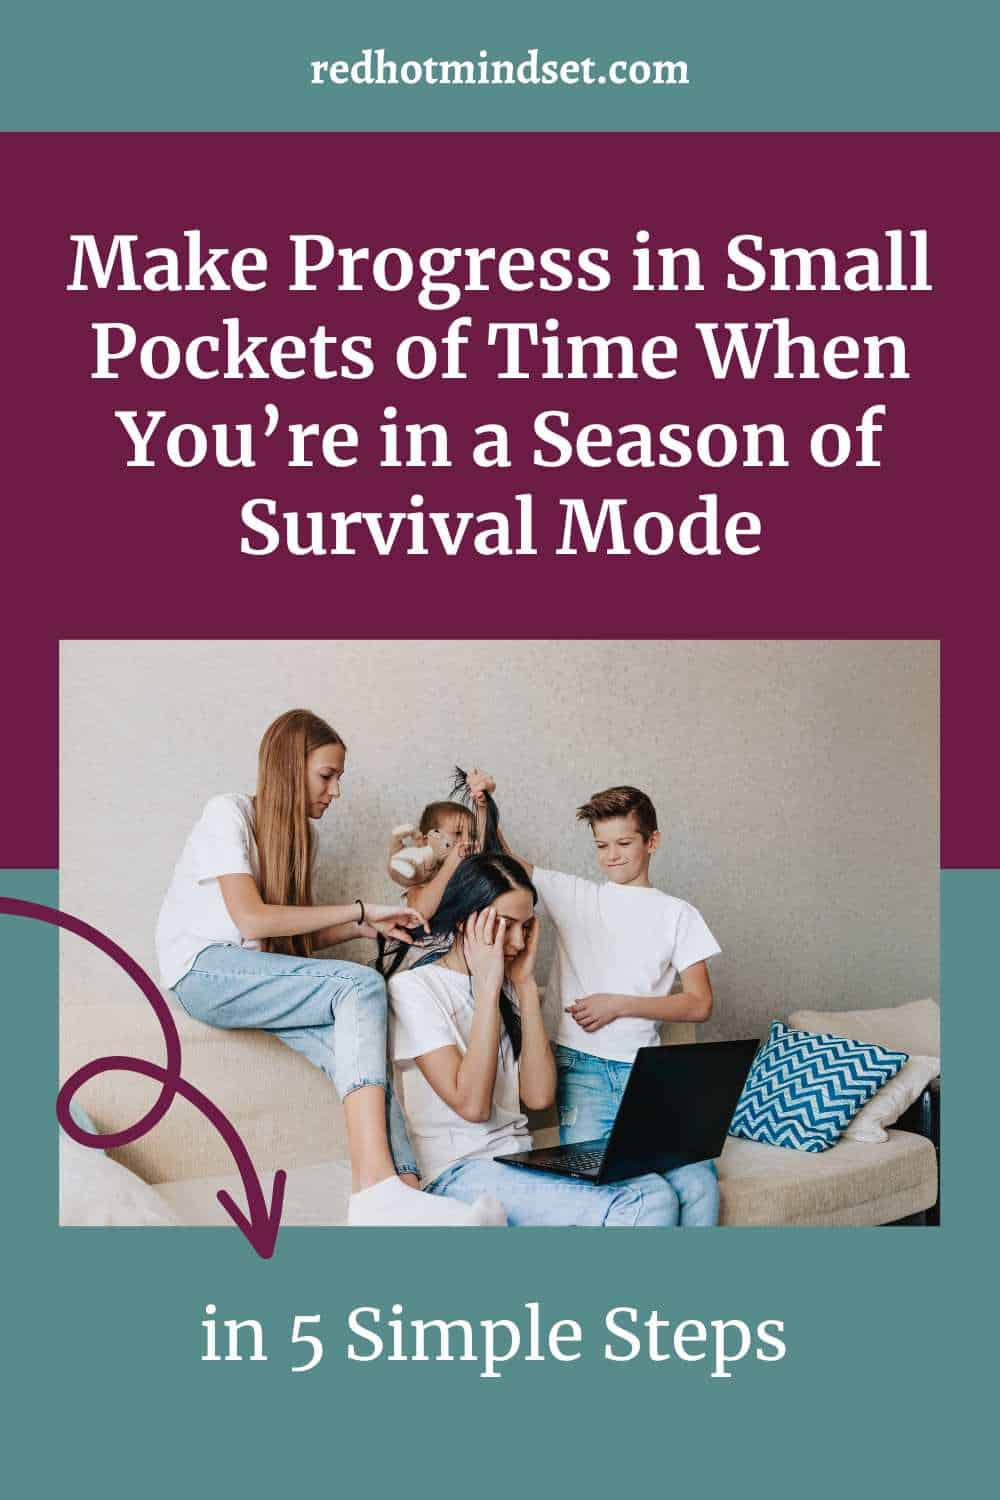 Ep 198 | 5 Steps to Make Progress in Small Pockets of Time When You’re in a Season of Survival Mode with Jessica Jackson